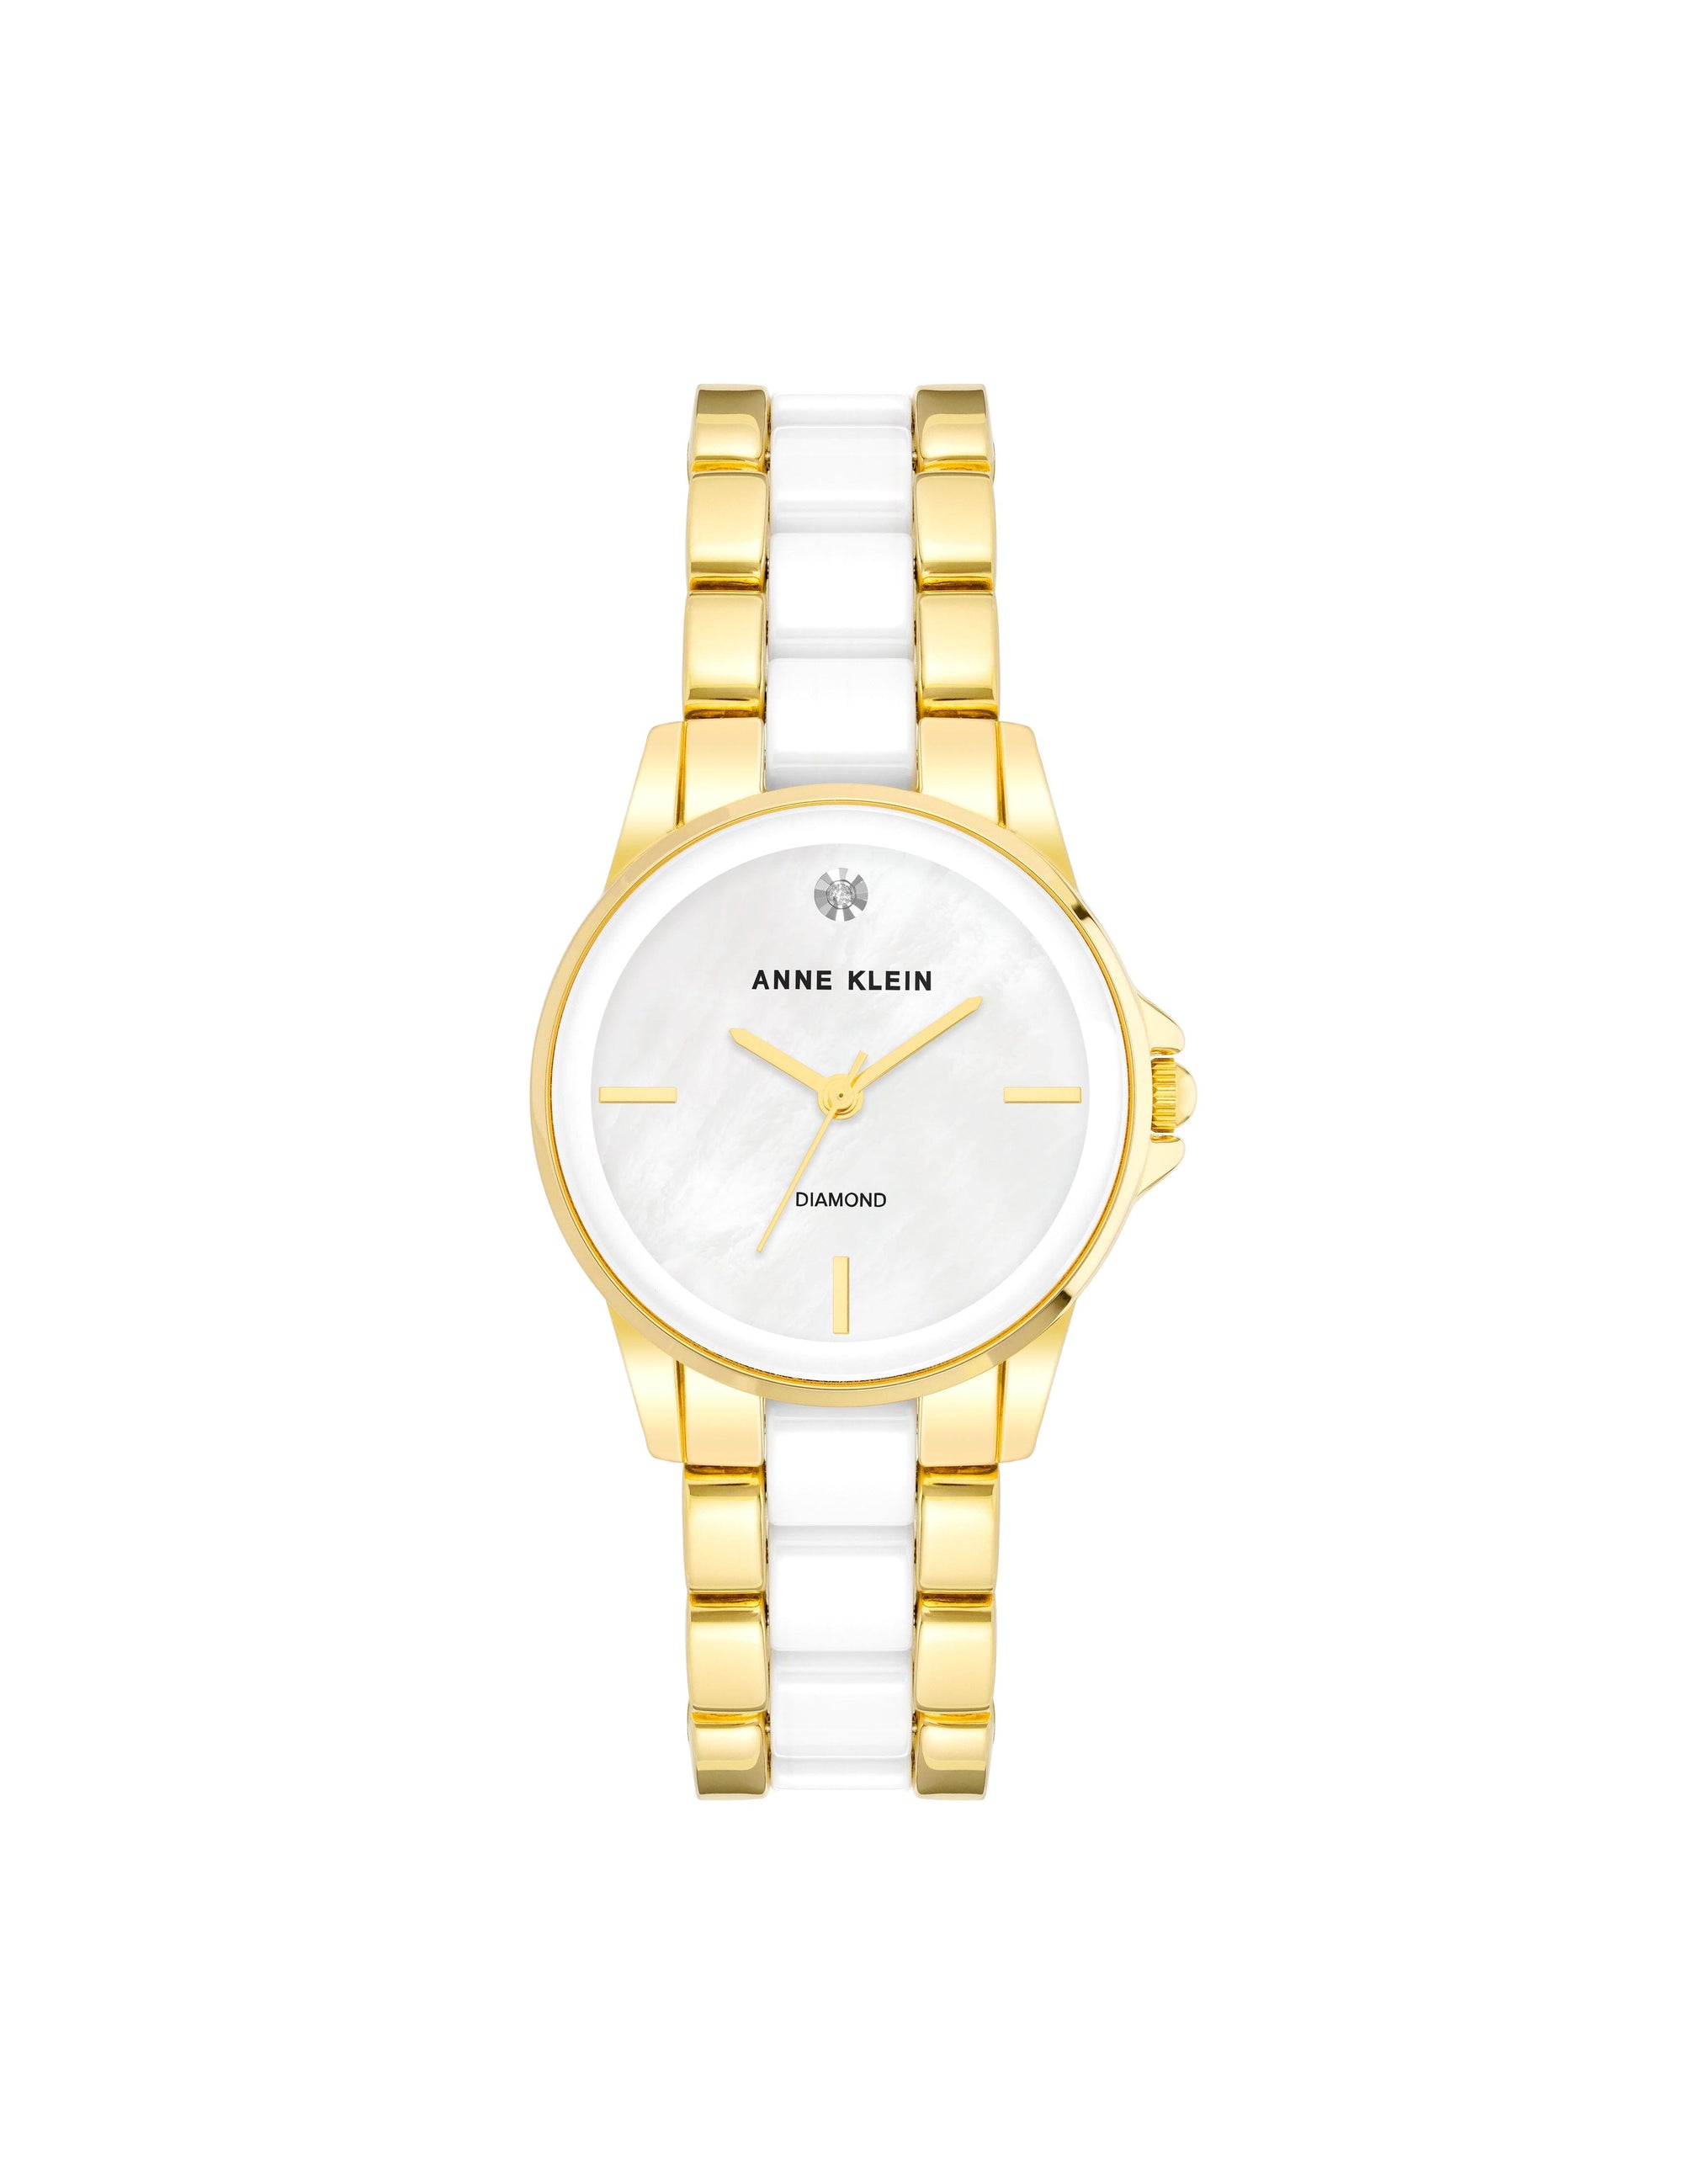 Anne Klein Watches: Shop the Latest Collection on The Helios Watch